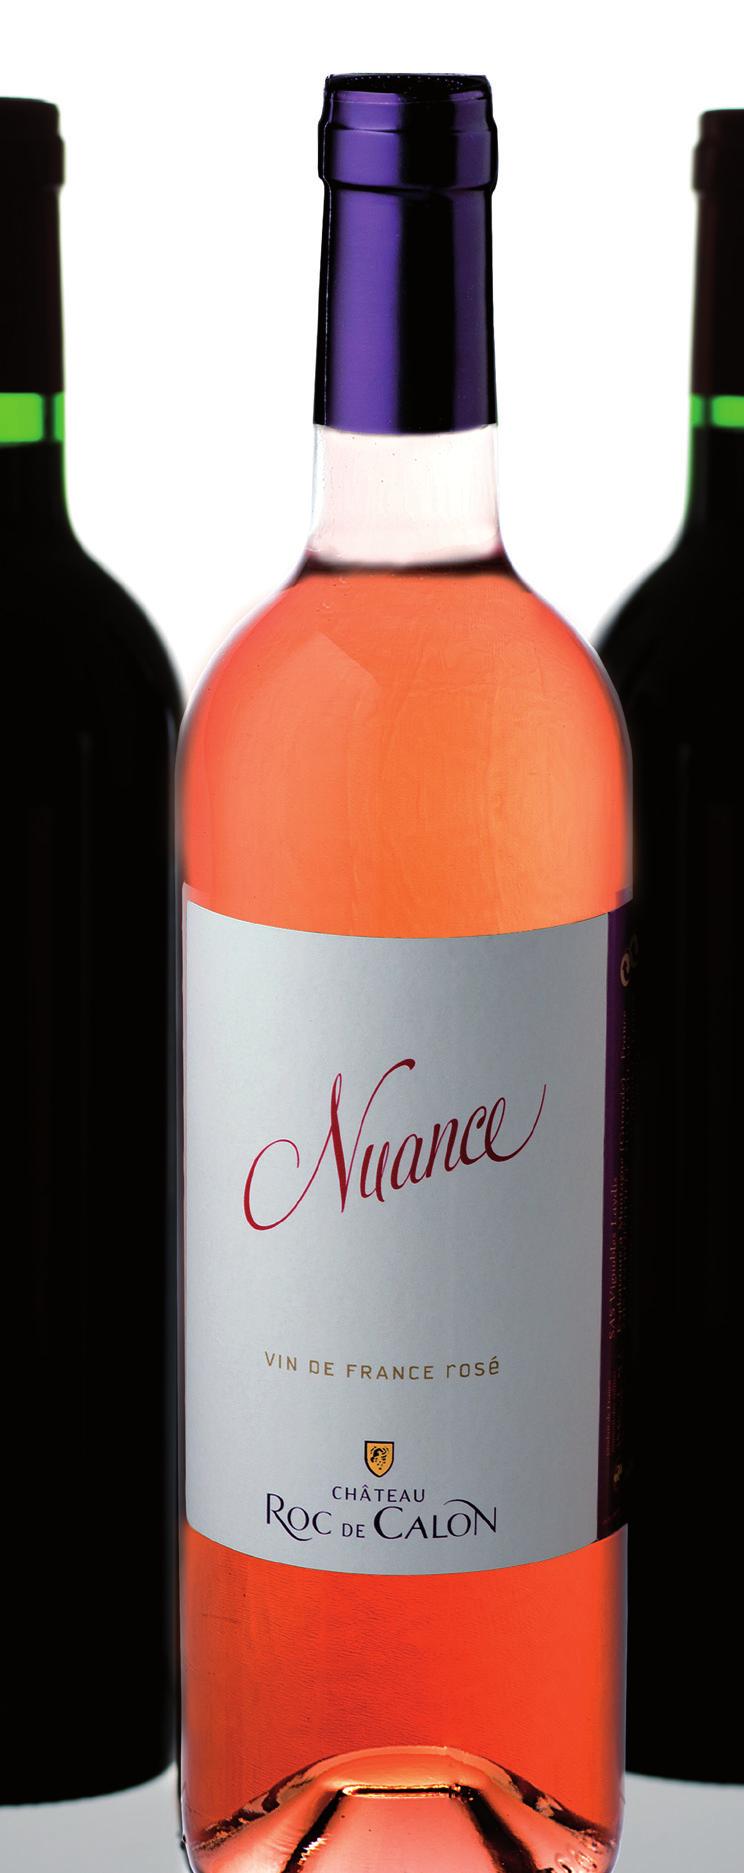 Appellation French rosé wine Vinification At low temperature to preserve the grape s floral and fruity aromas Production 2 000 bottles and 1 000 magnums MATURAGE